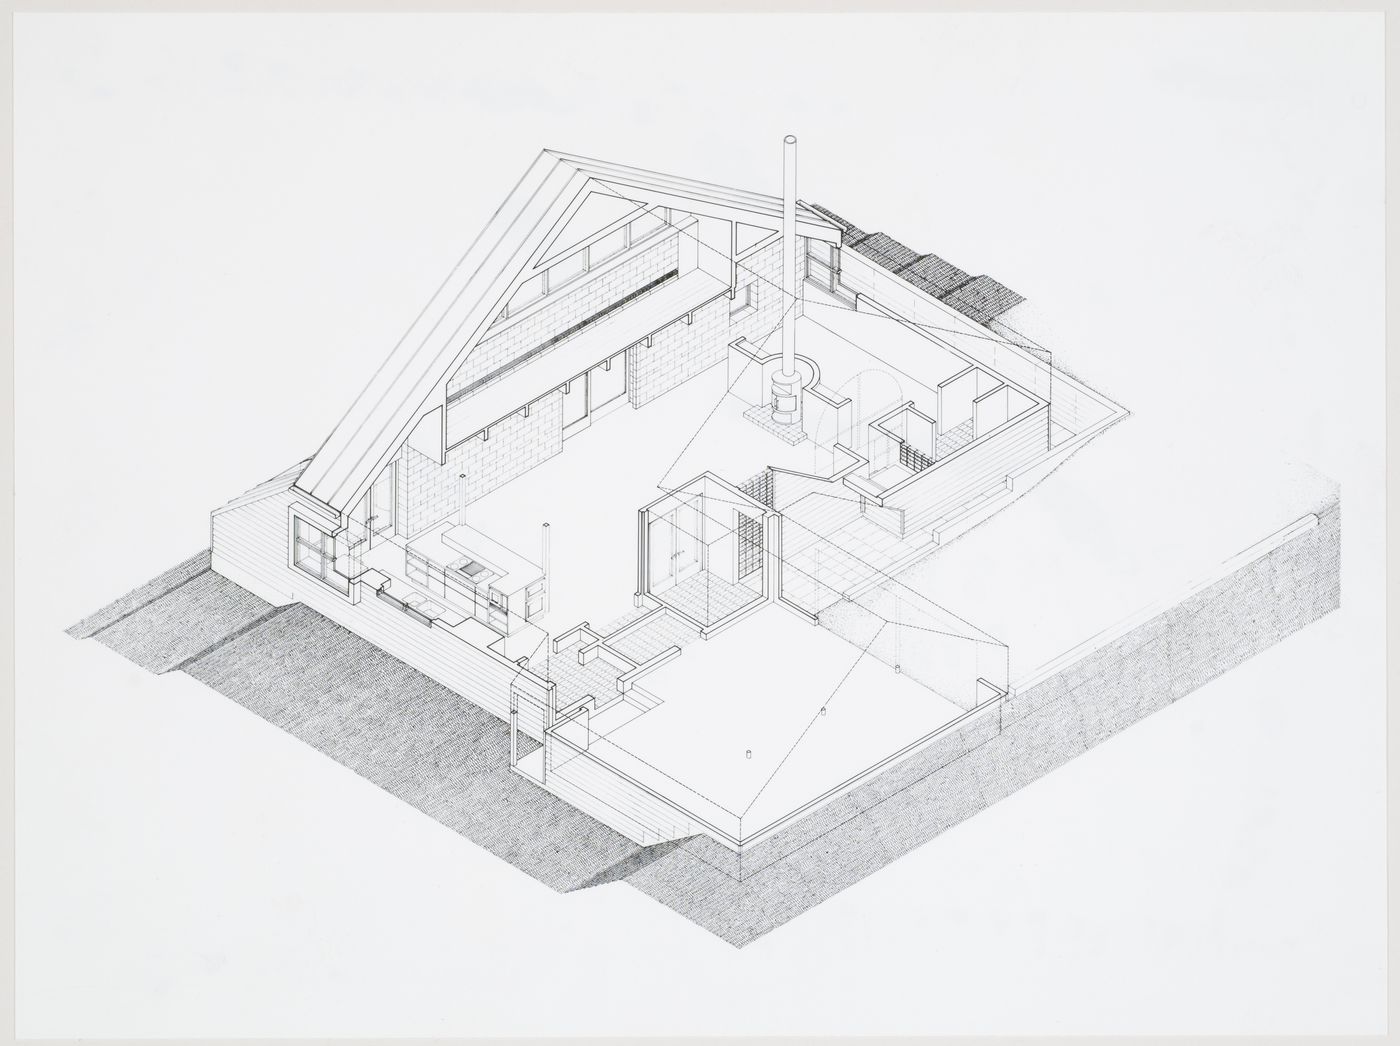 Isometric view of the Mills-Wright Residence in Chatham, New Jersey